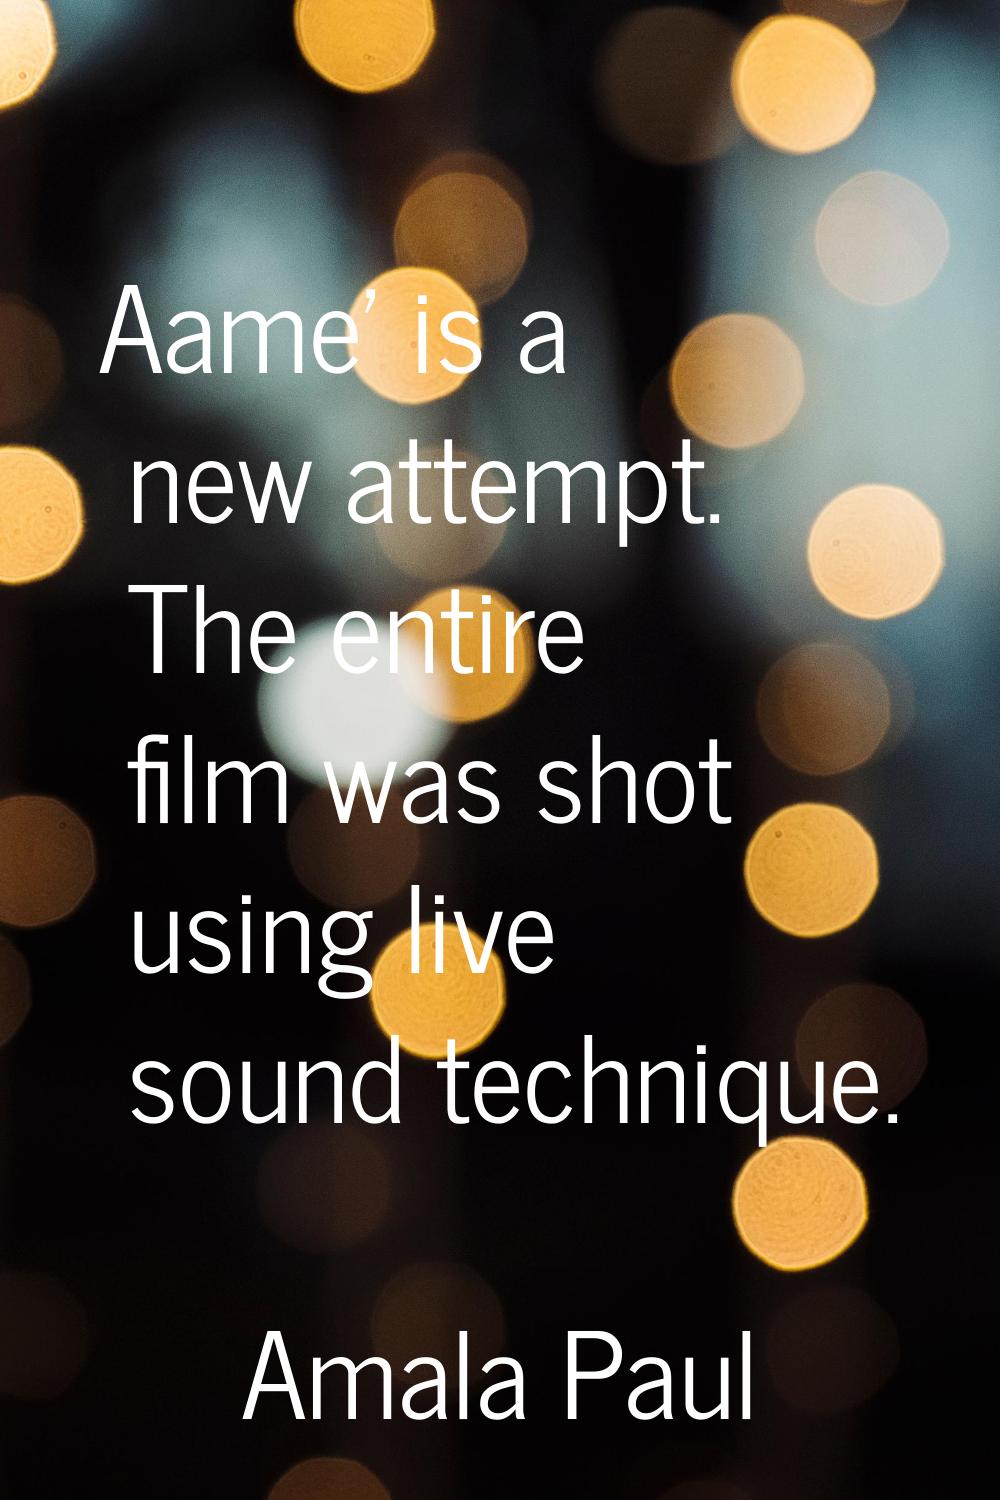 Aame' is a new attempt. The entire film was shot using live sound technique.